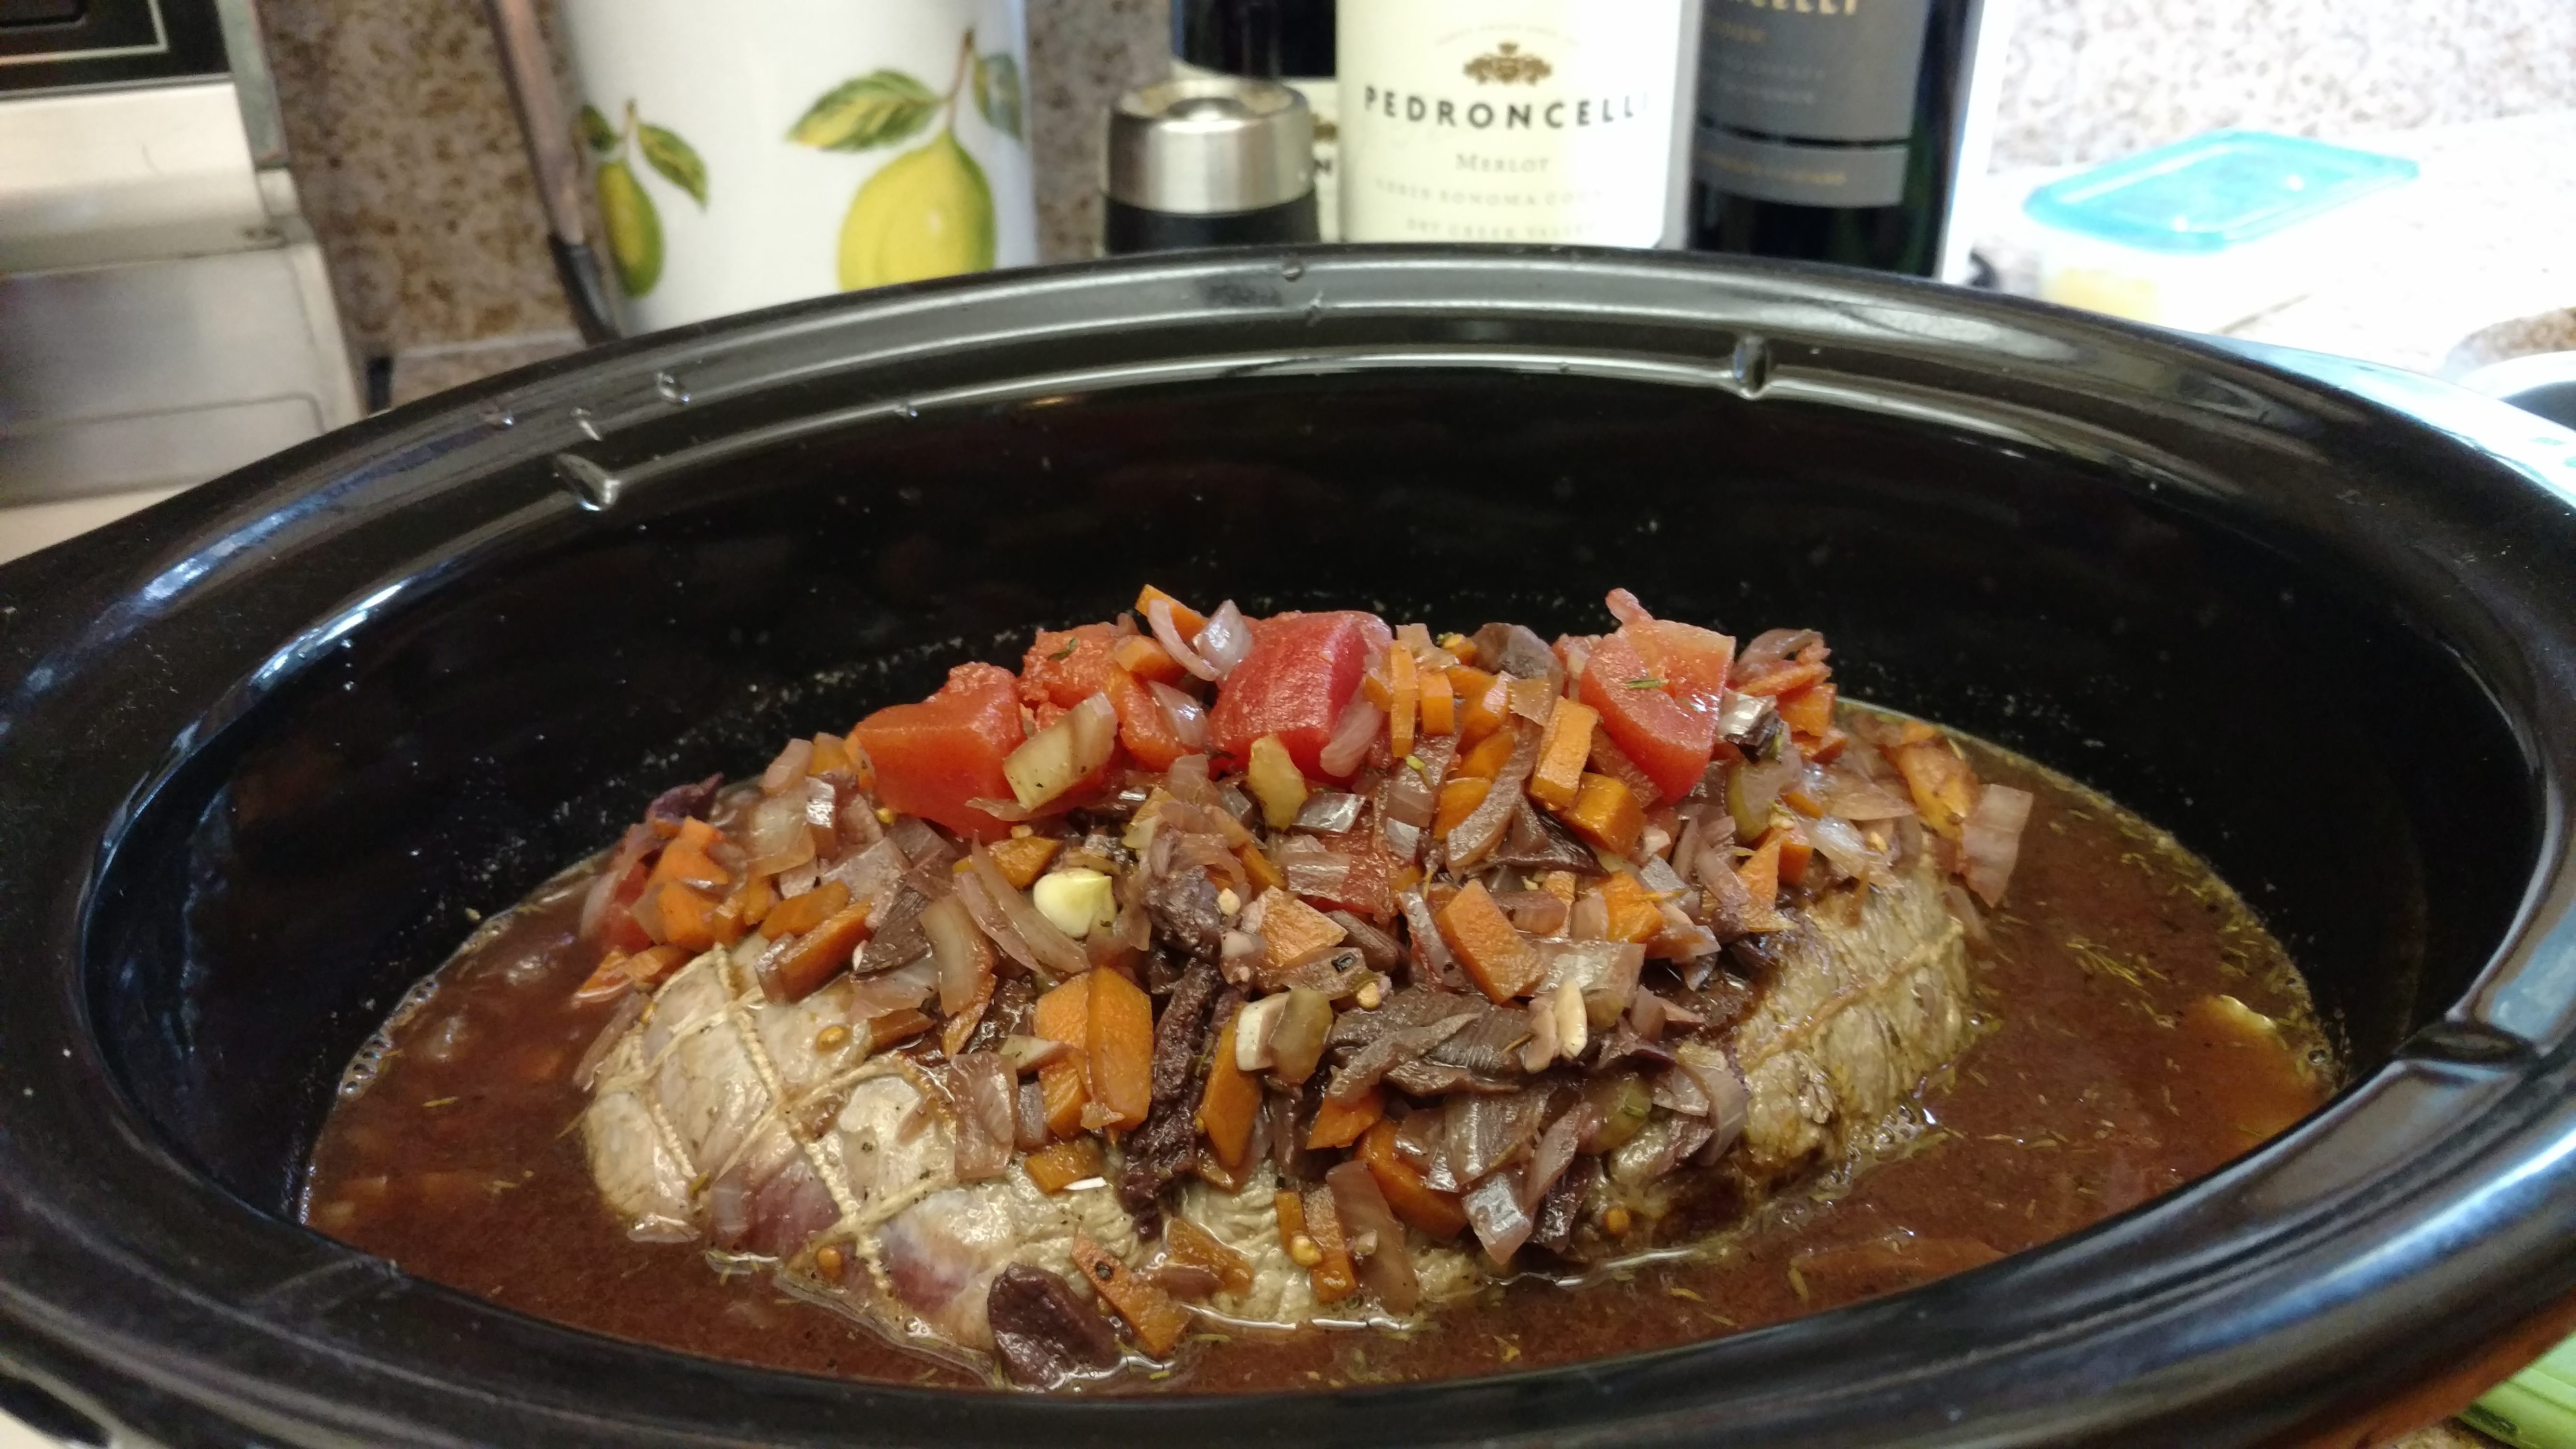 Slow cooker ready.